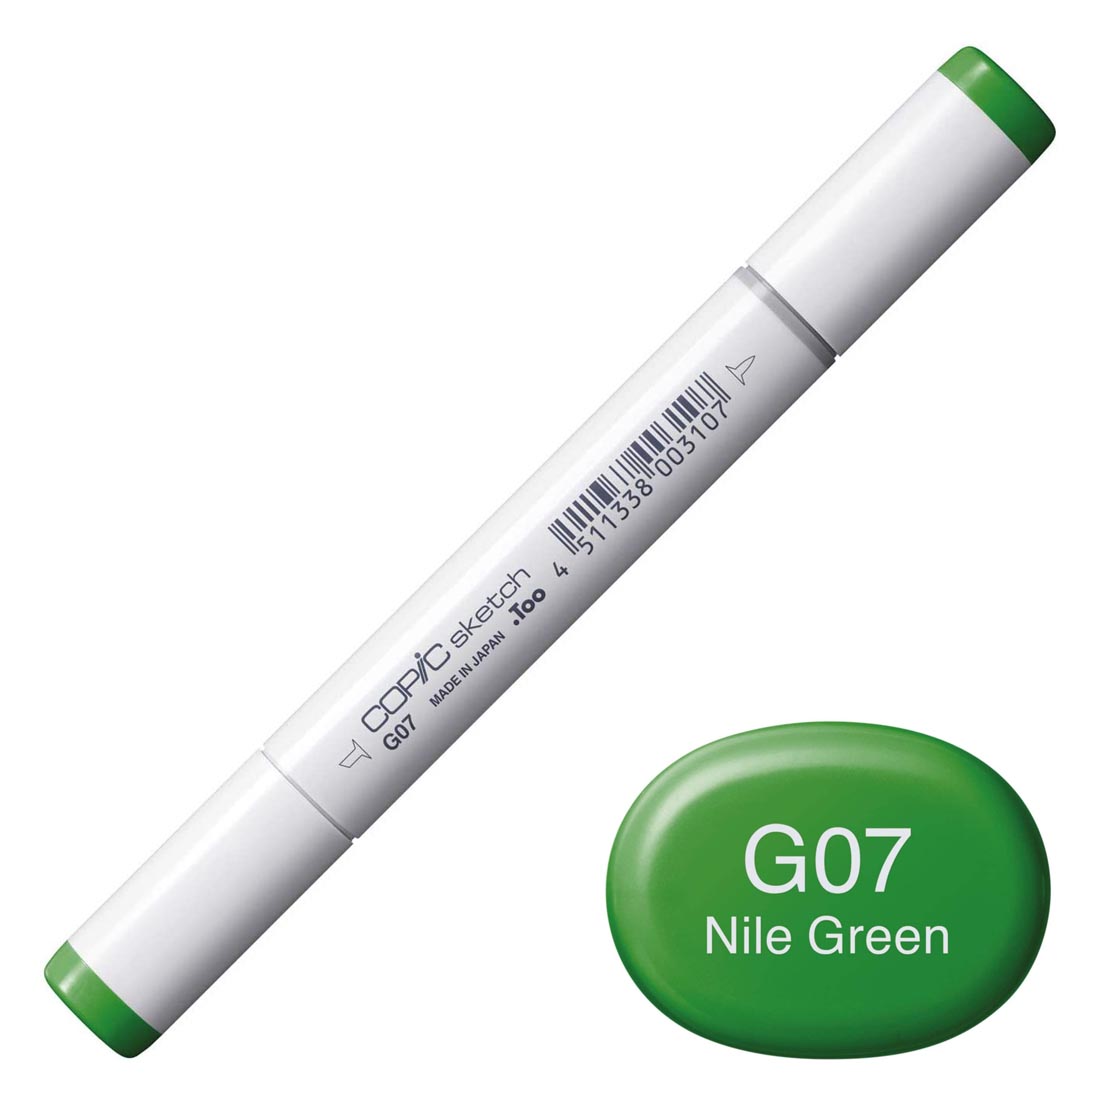 COPIC Sketch Marker with a color swatch and text of G07 Nile Green